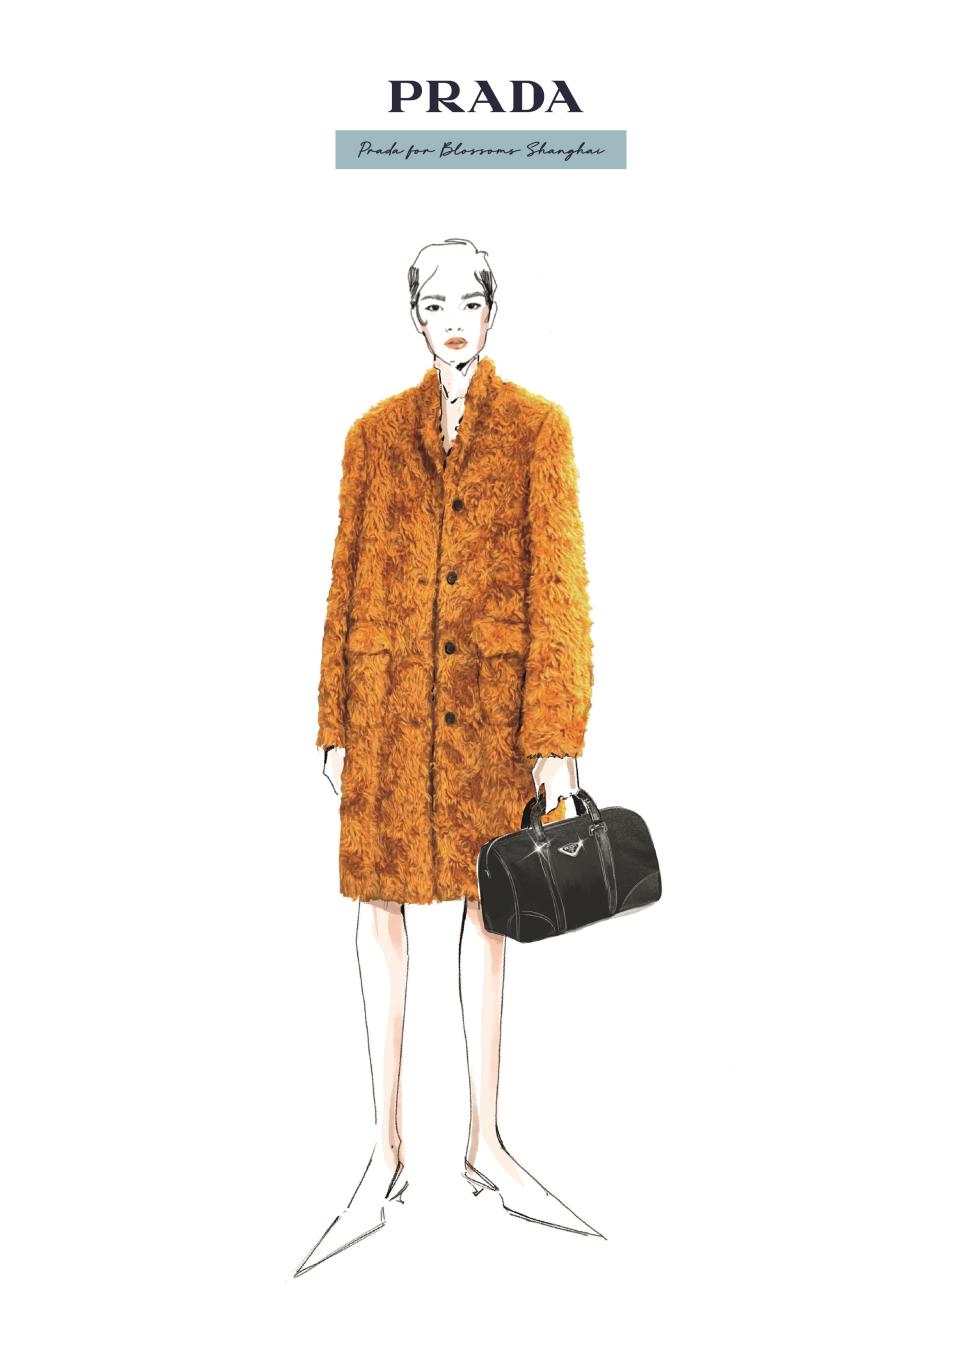 A sketch of a look from the Prada x Blossoms Shanghai collaboration.